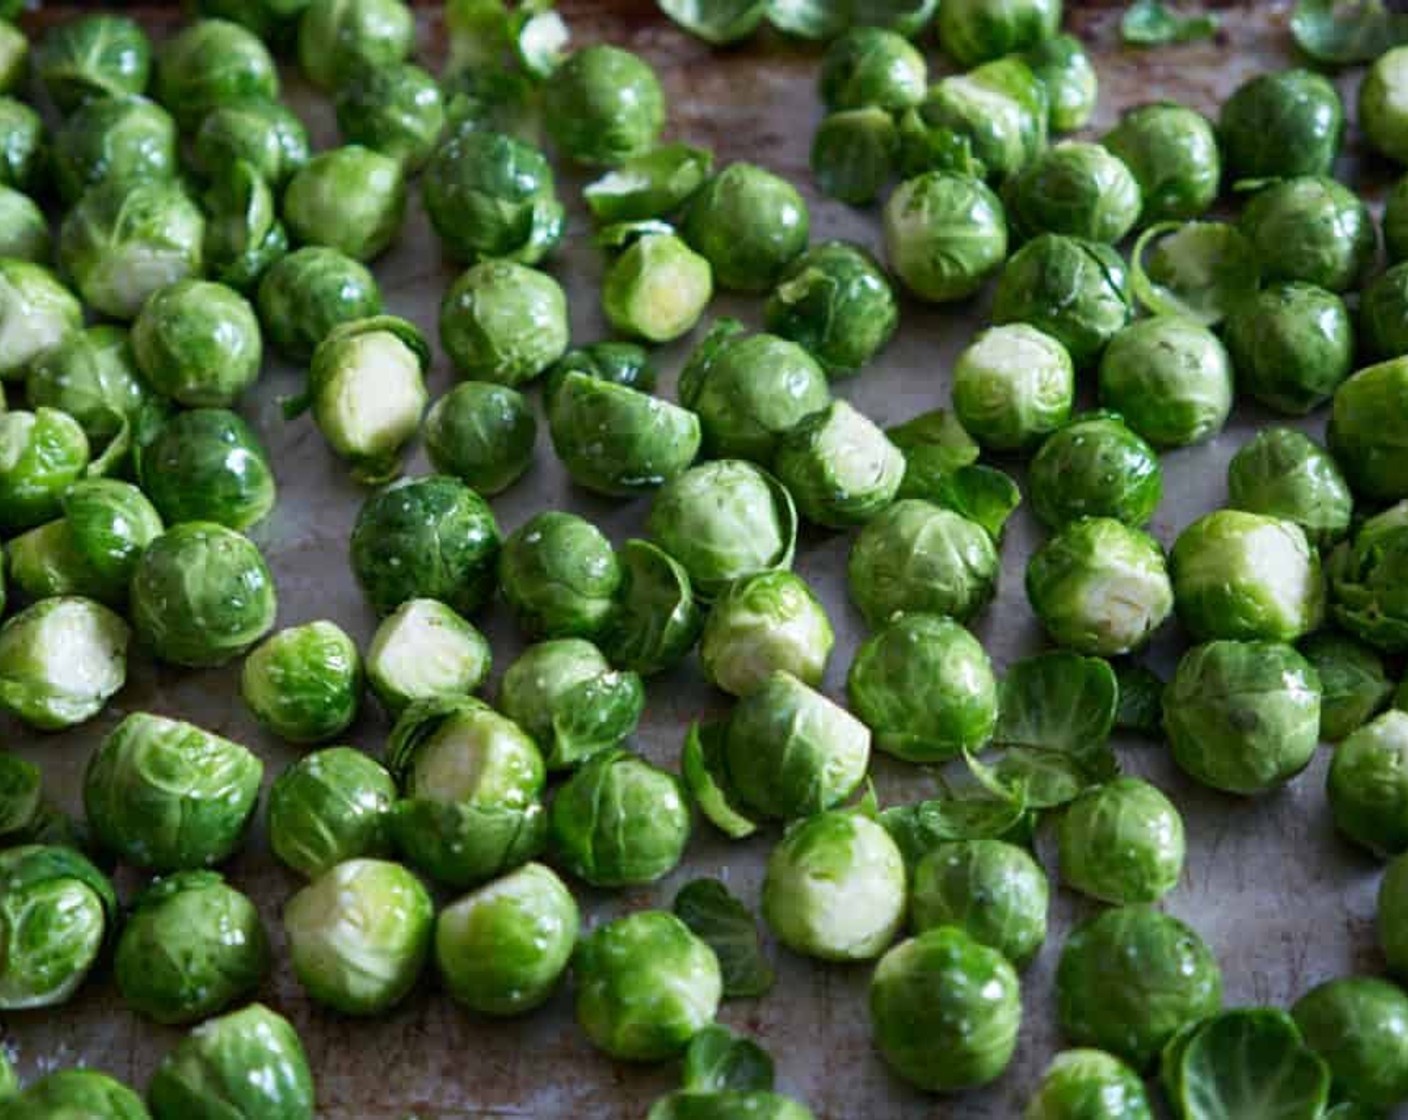 step 3 Place sprouts on a baking sheet and drizzle with the Olive Oil (2 Tbsp) and a pinch or two of Kosher Salt (to taste). Mix them all together so they are evenly coated and bake for 15 minutes.